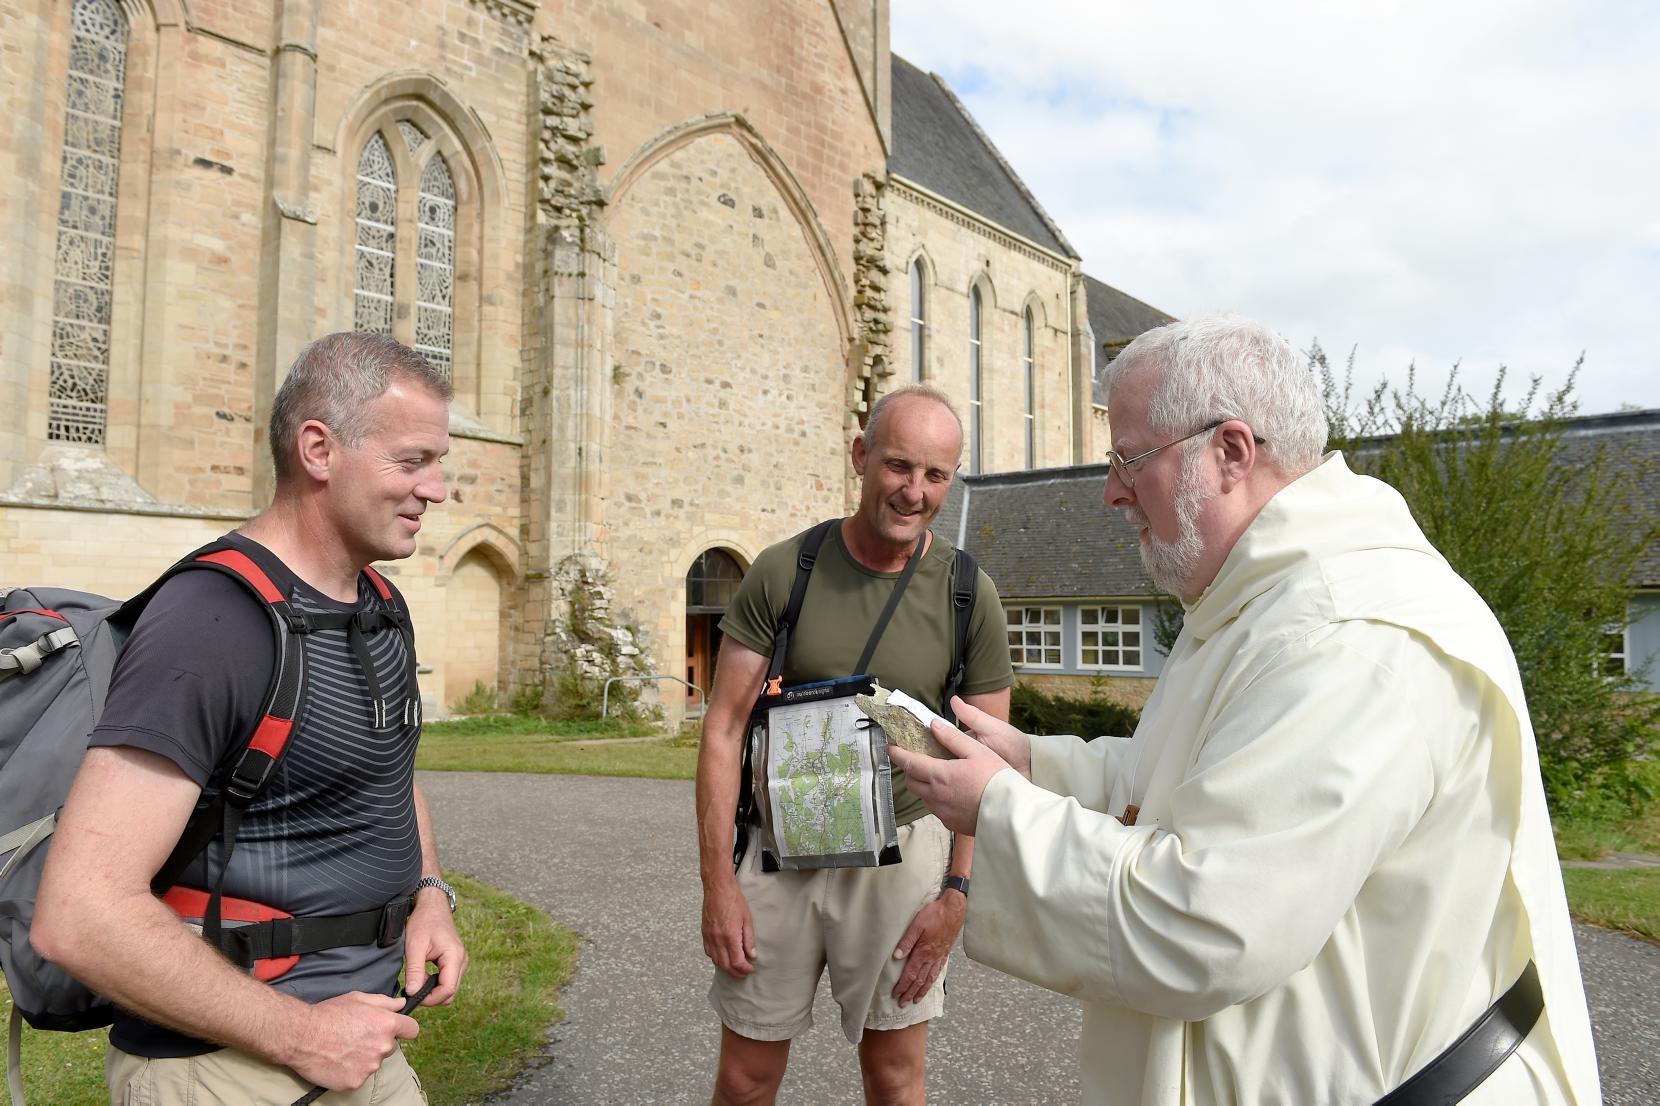 Pilgrims Andy Wallis (left) and Alistair Monkman (right) are greeted at Pluscarden Abbey last night by Abbot Anselm